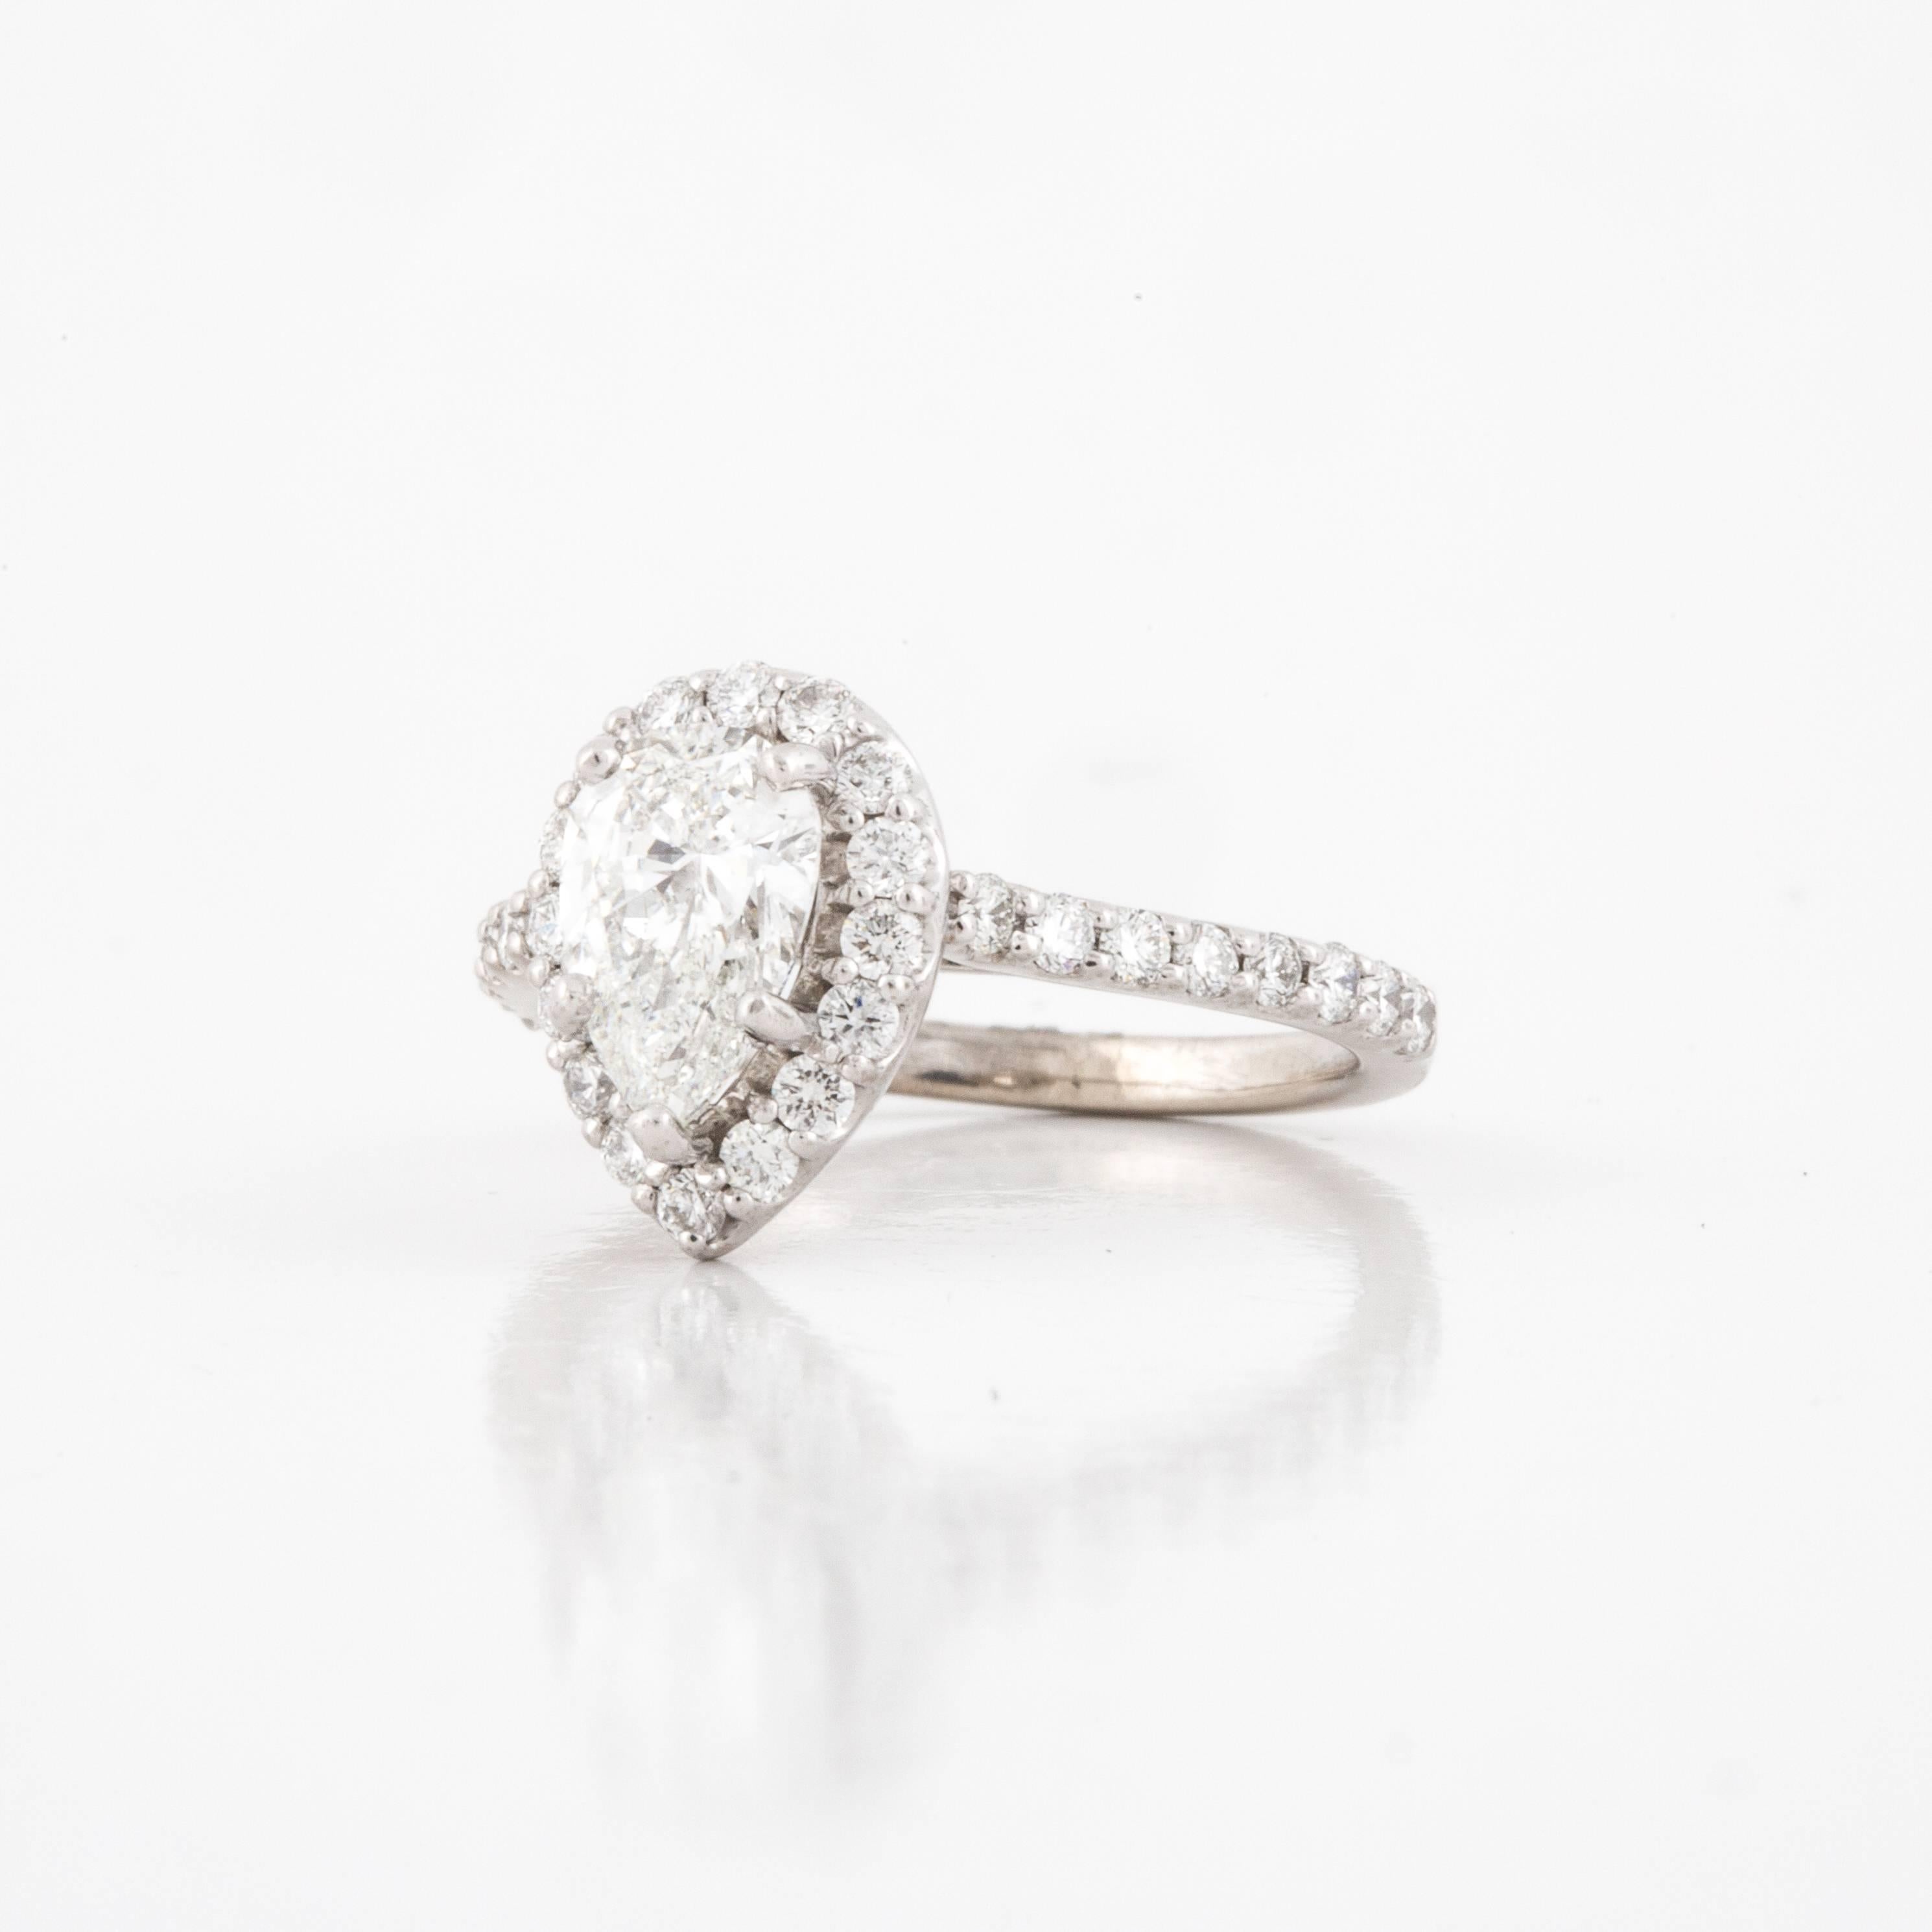 This halo style engagement ring by Ritani features a pear shaped diamond in 14K white gold.  The pear shaped diamond is 0.82 carats, F-G color and SI1-2 clarity.  It is accented by thirty-two (32) round diamonds that total 0.50 carats, G-H color and